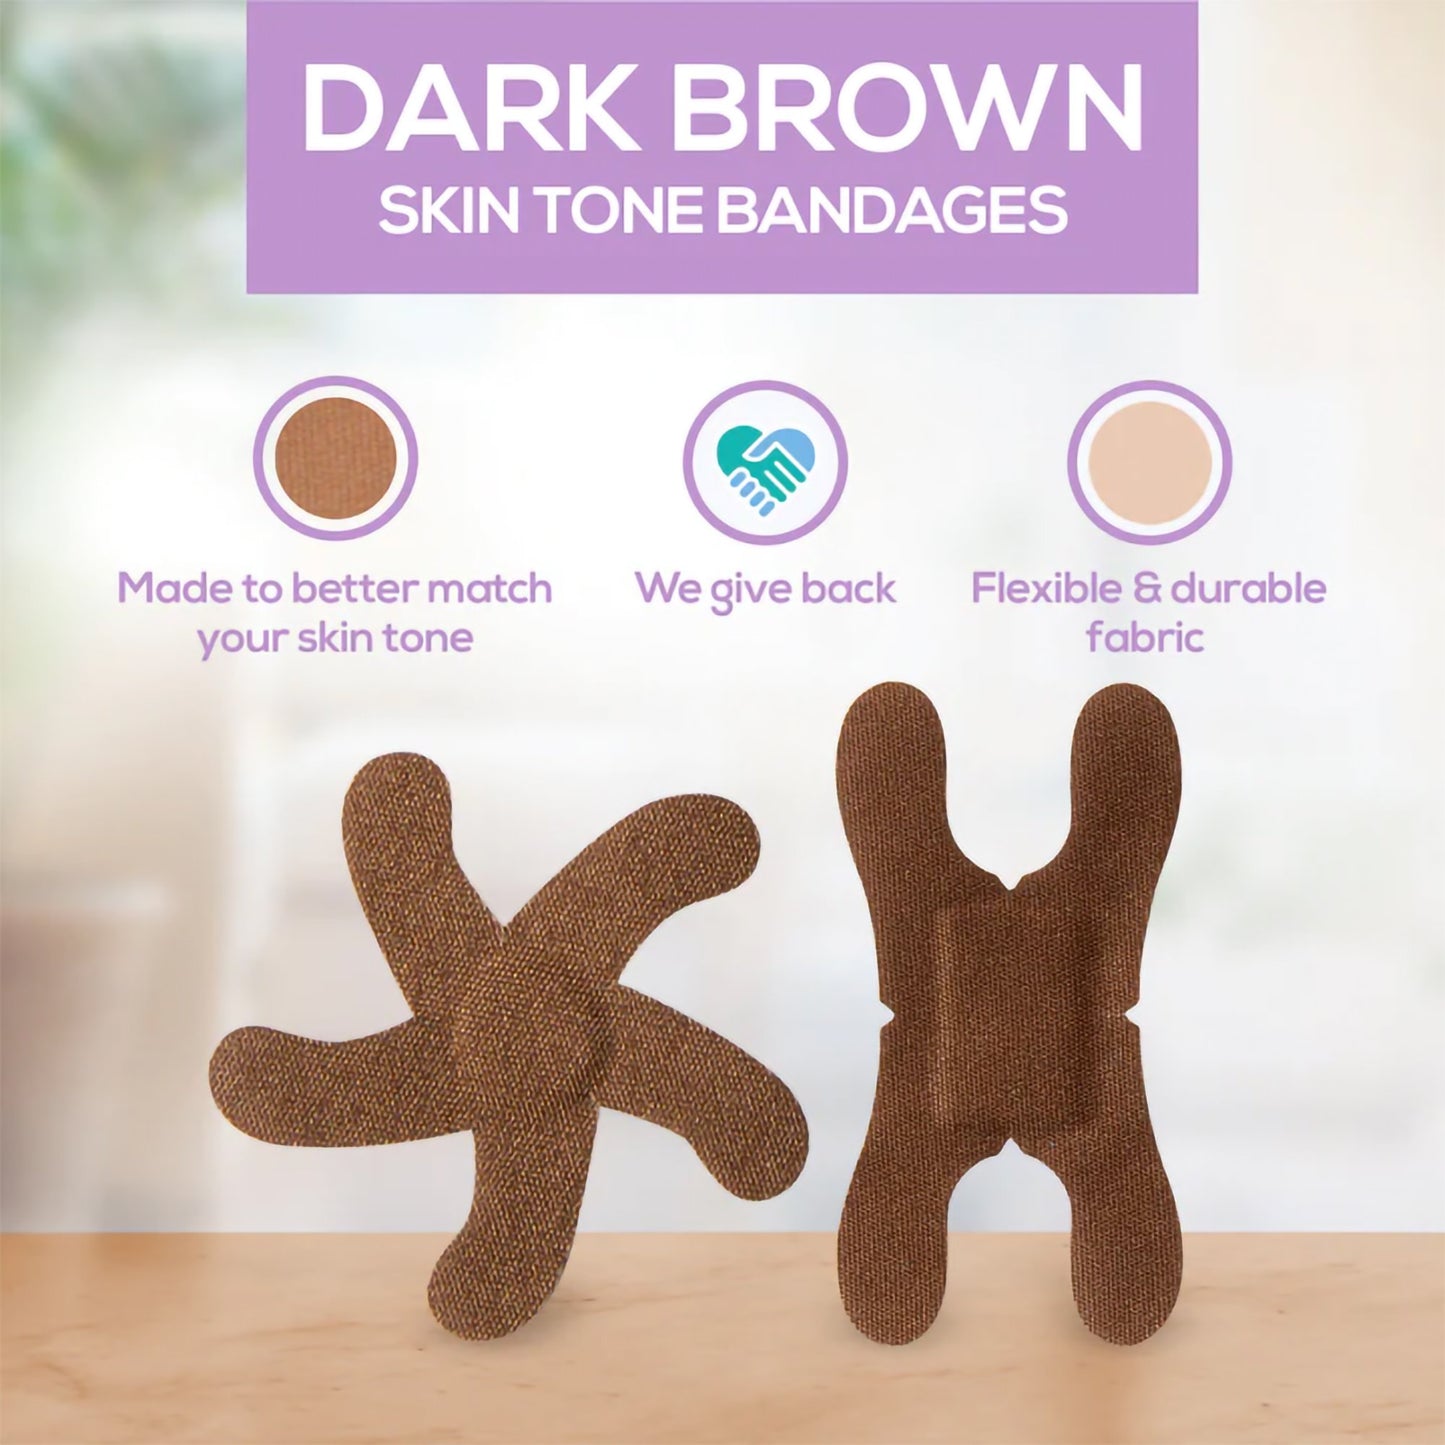 Tru-Colour Knuckle and Fingertip Bandages, Flexible Fabric for Dark Brown Skin Tones